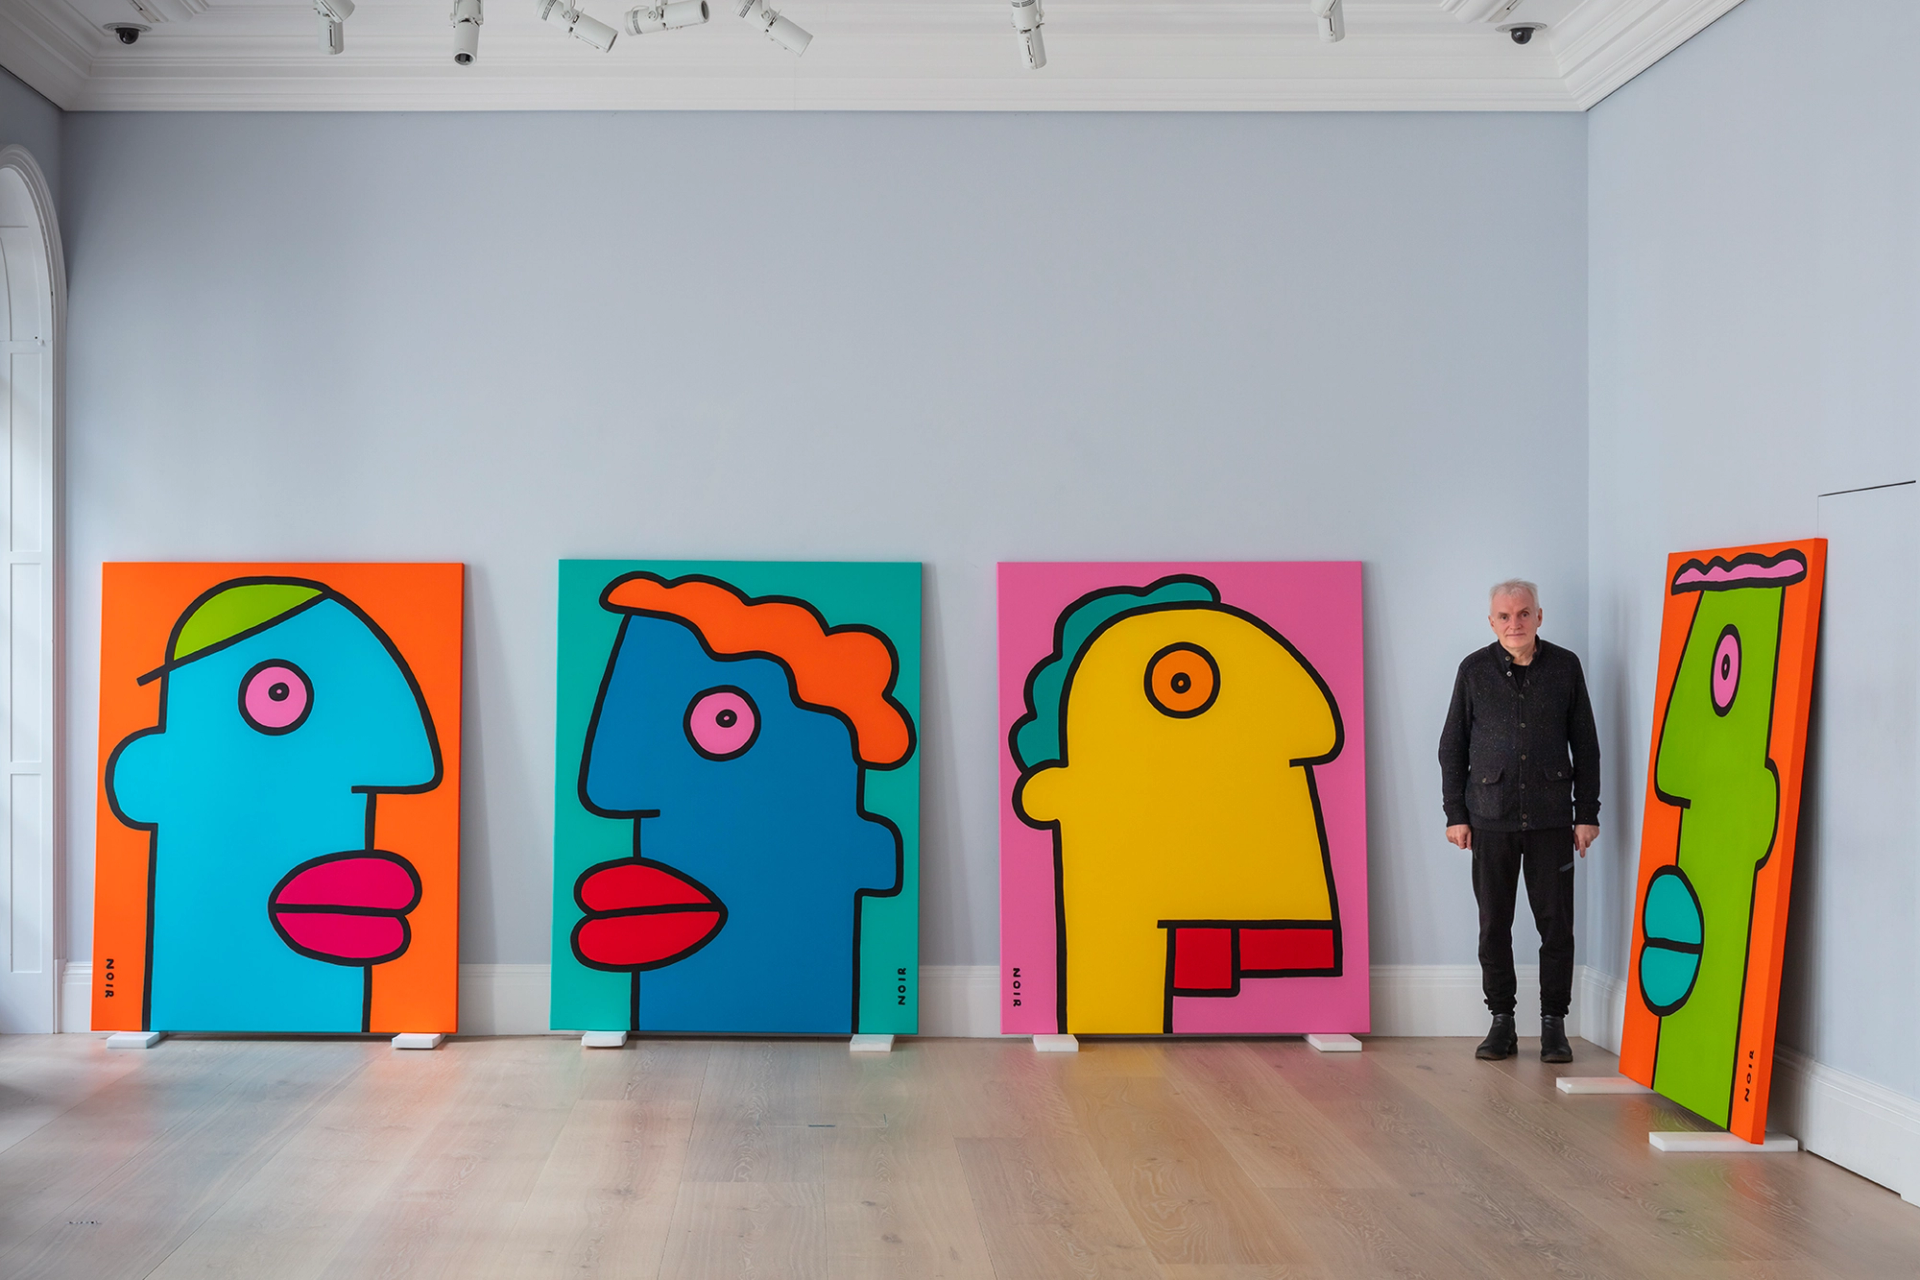 A photograph of Thierry Noir facing the camera and standing in an art gallery surrounded by four large-scale caricature portrait canvases. The canvases are created in vibrant hues and lined up against the walls of the gallery.